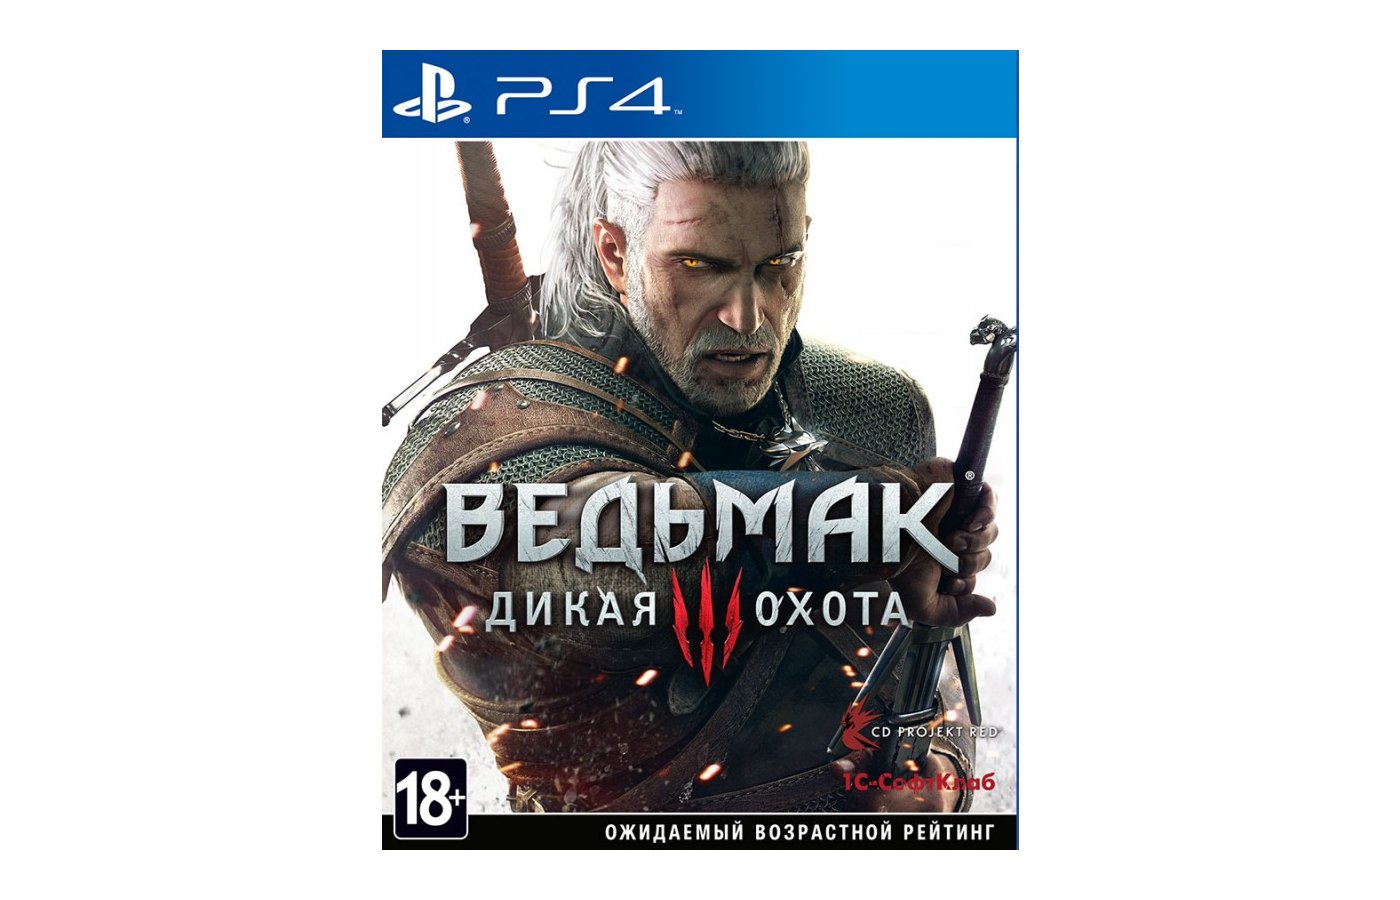 Playstation store the witcher 3 фото 6